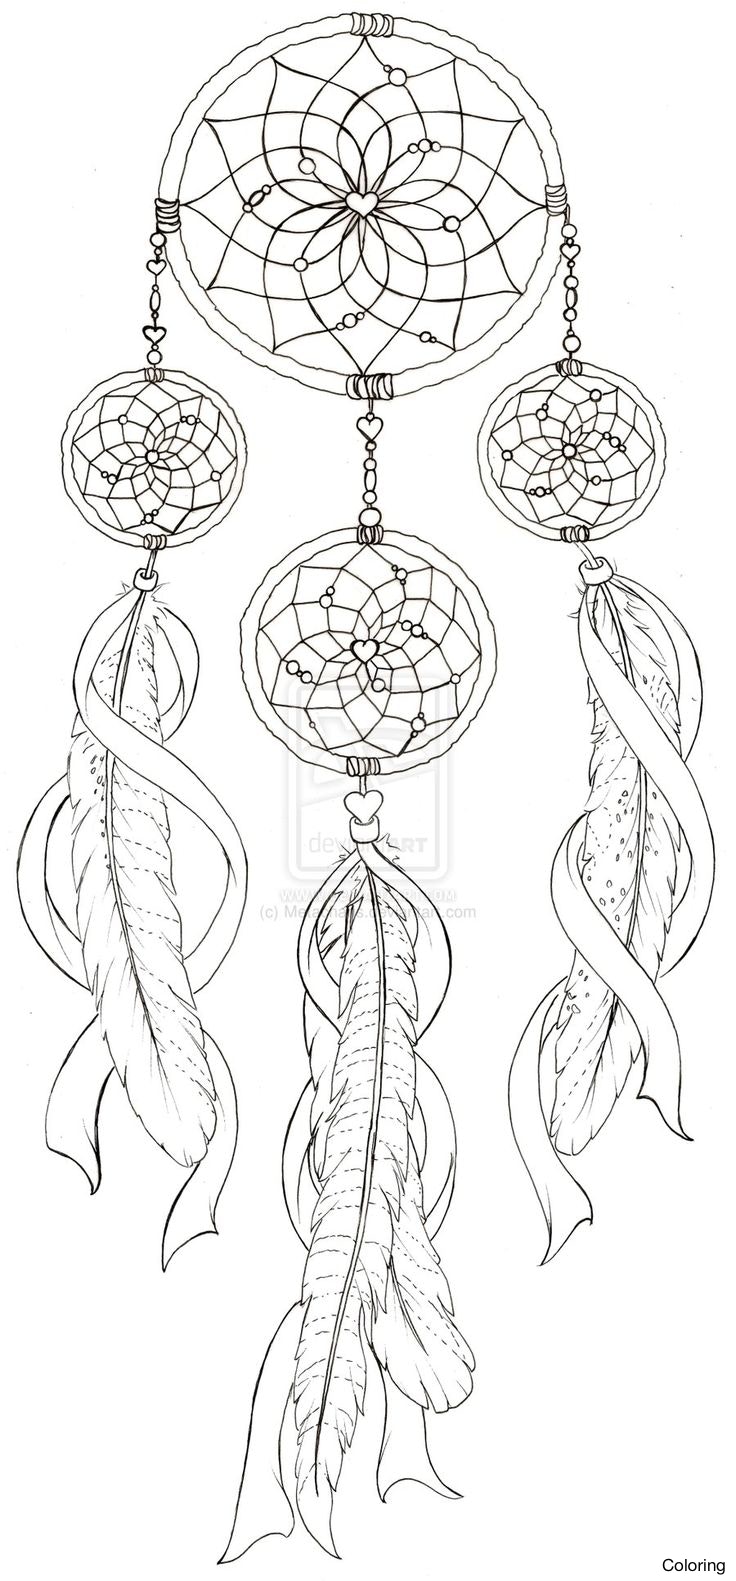 moon-dreamcatcher-drawing-at-getdrawings-free-download